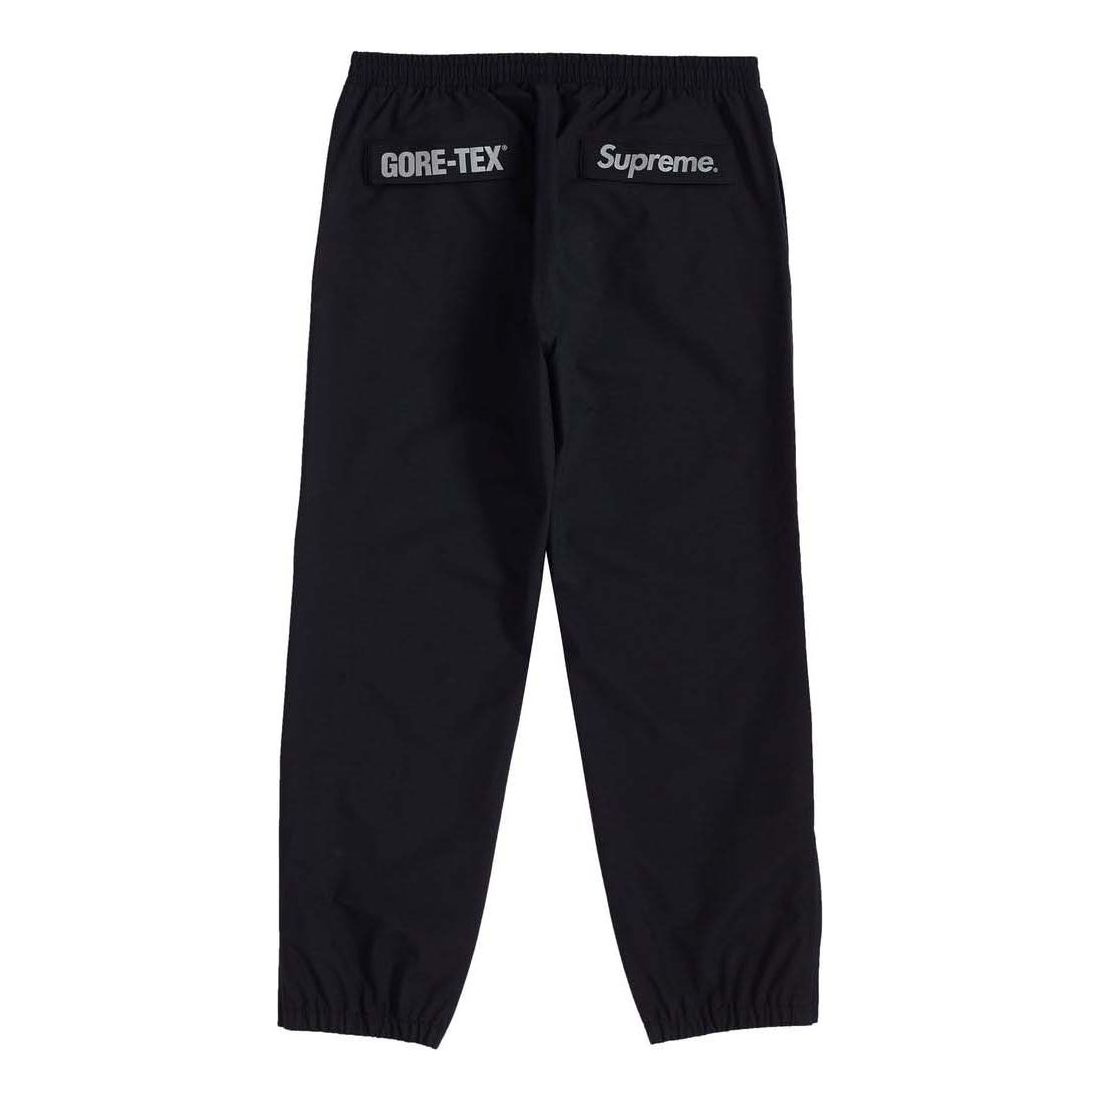 Supreme FW18 x GORE-TEX Pant Black Crossover Casual Long Pants